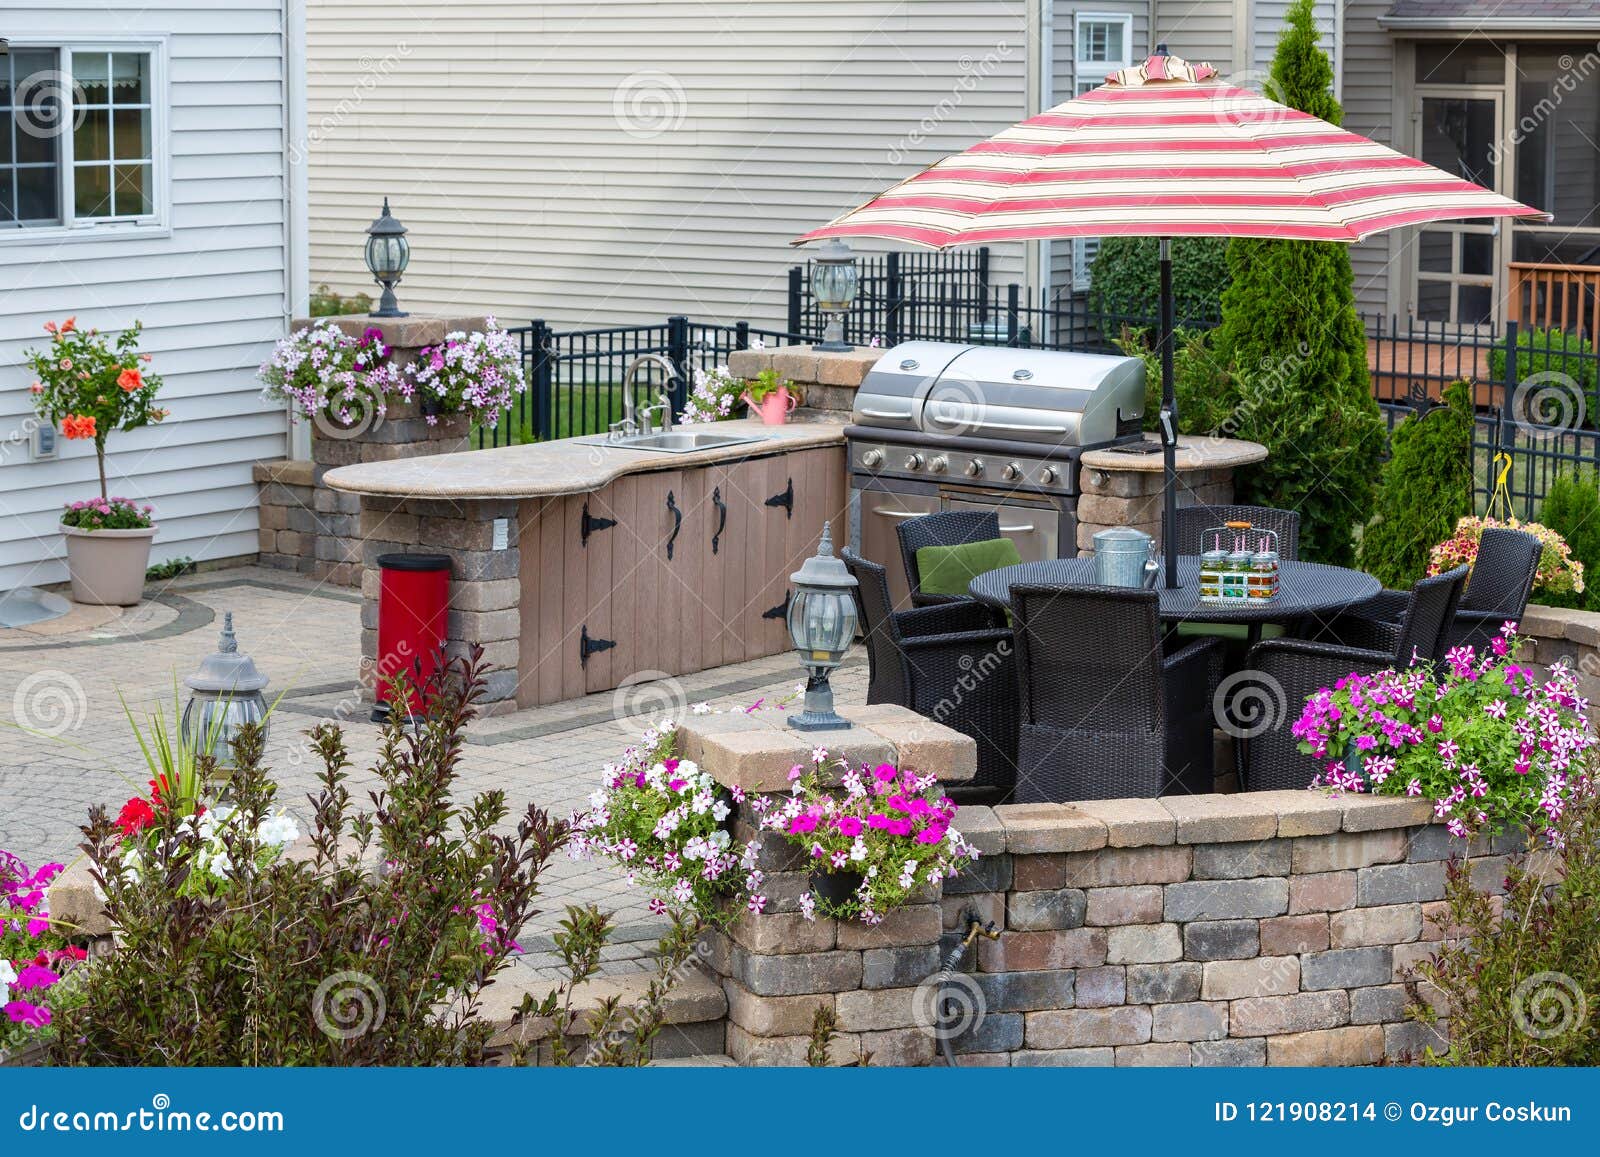 upscale outdoor patio with kitchen area